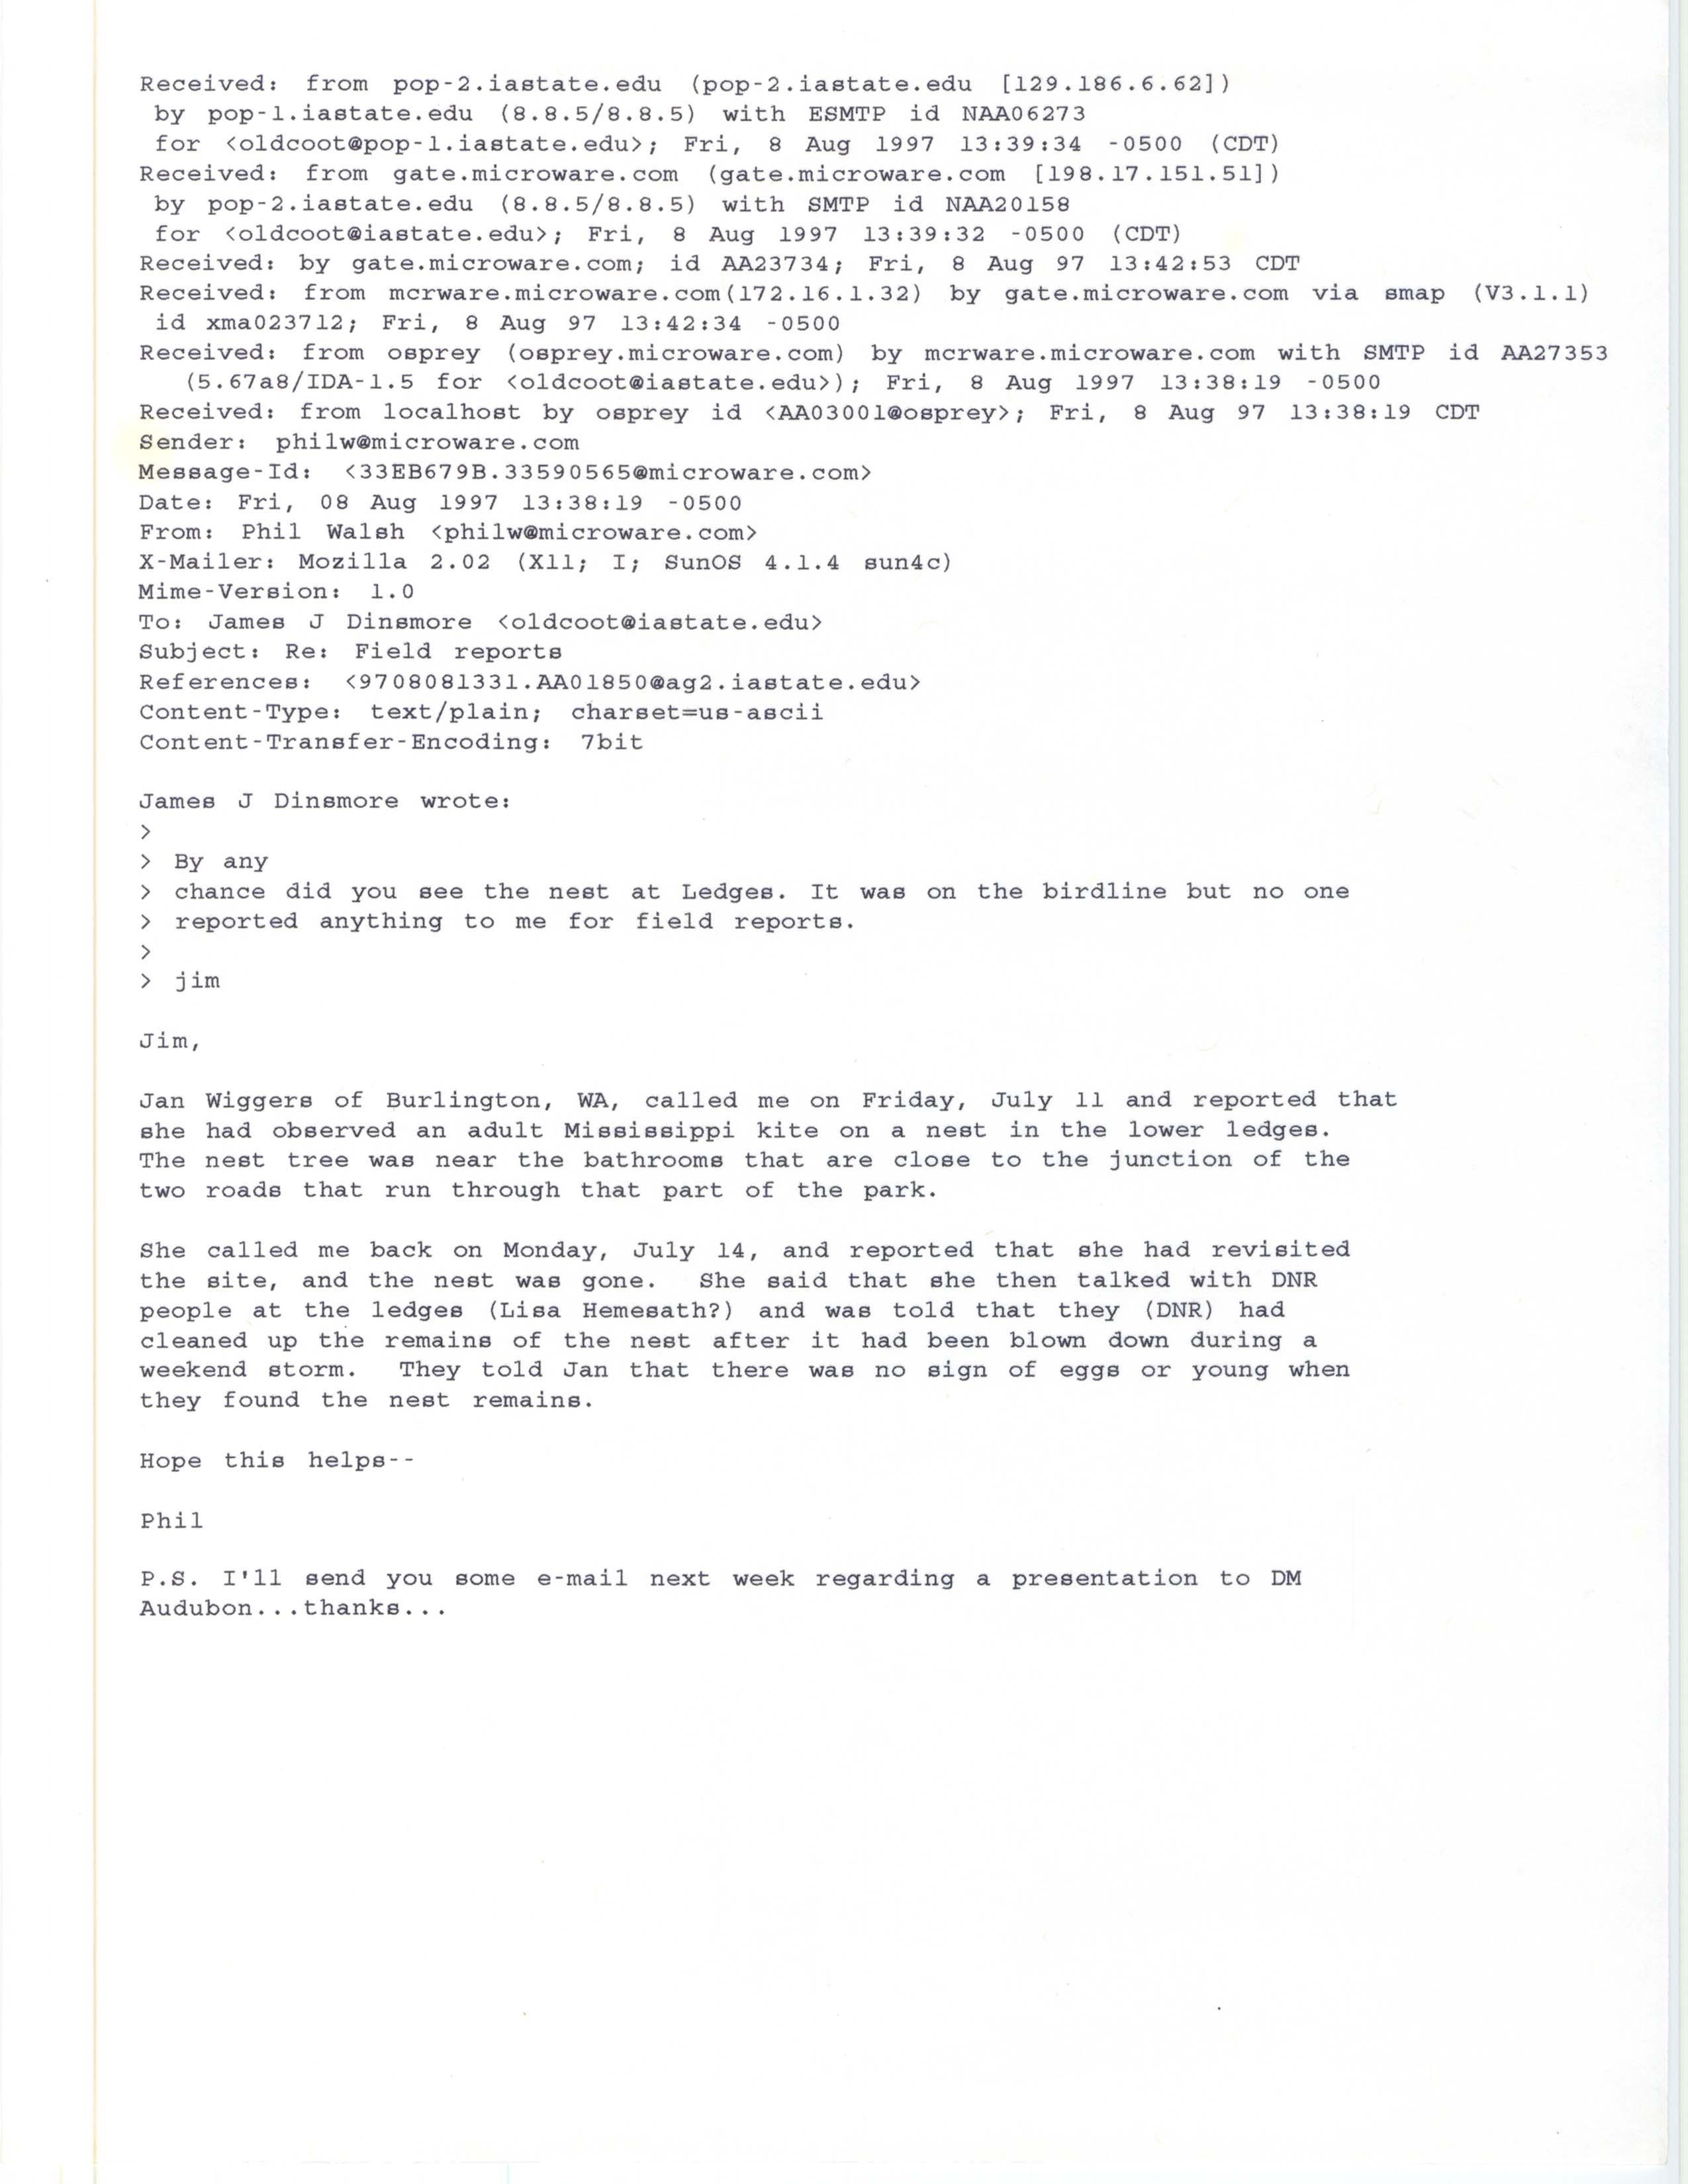 Philip J. Walsh email to James J. Dinsmore regarding a Mississippi Kite sighting and nest, August 8, 1997